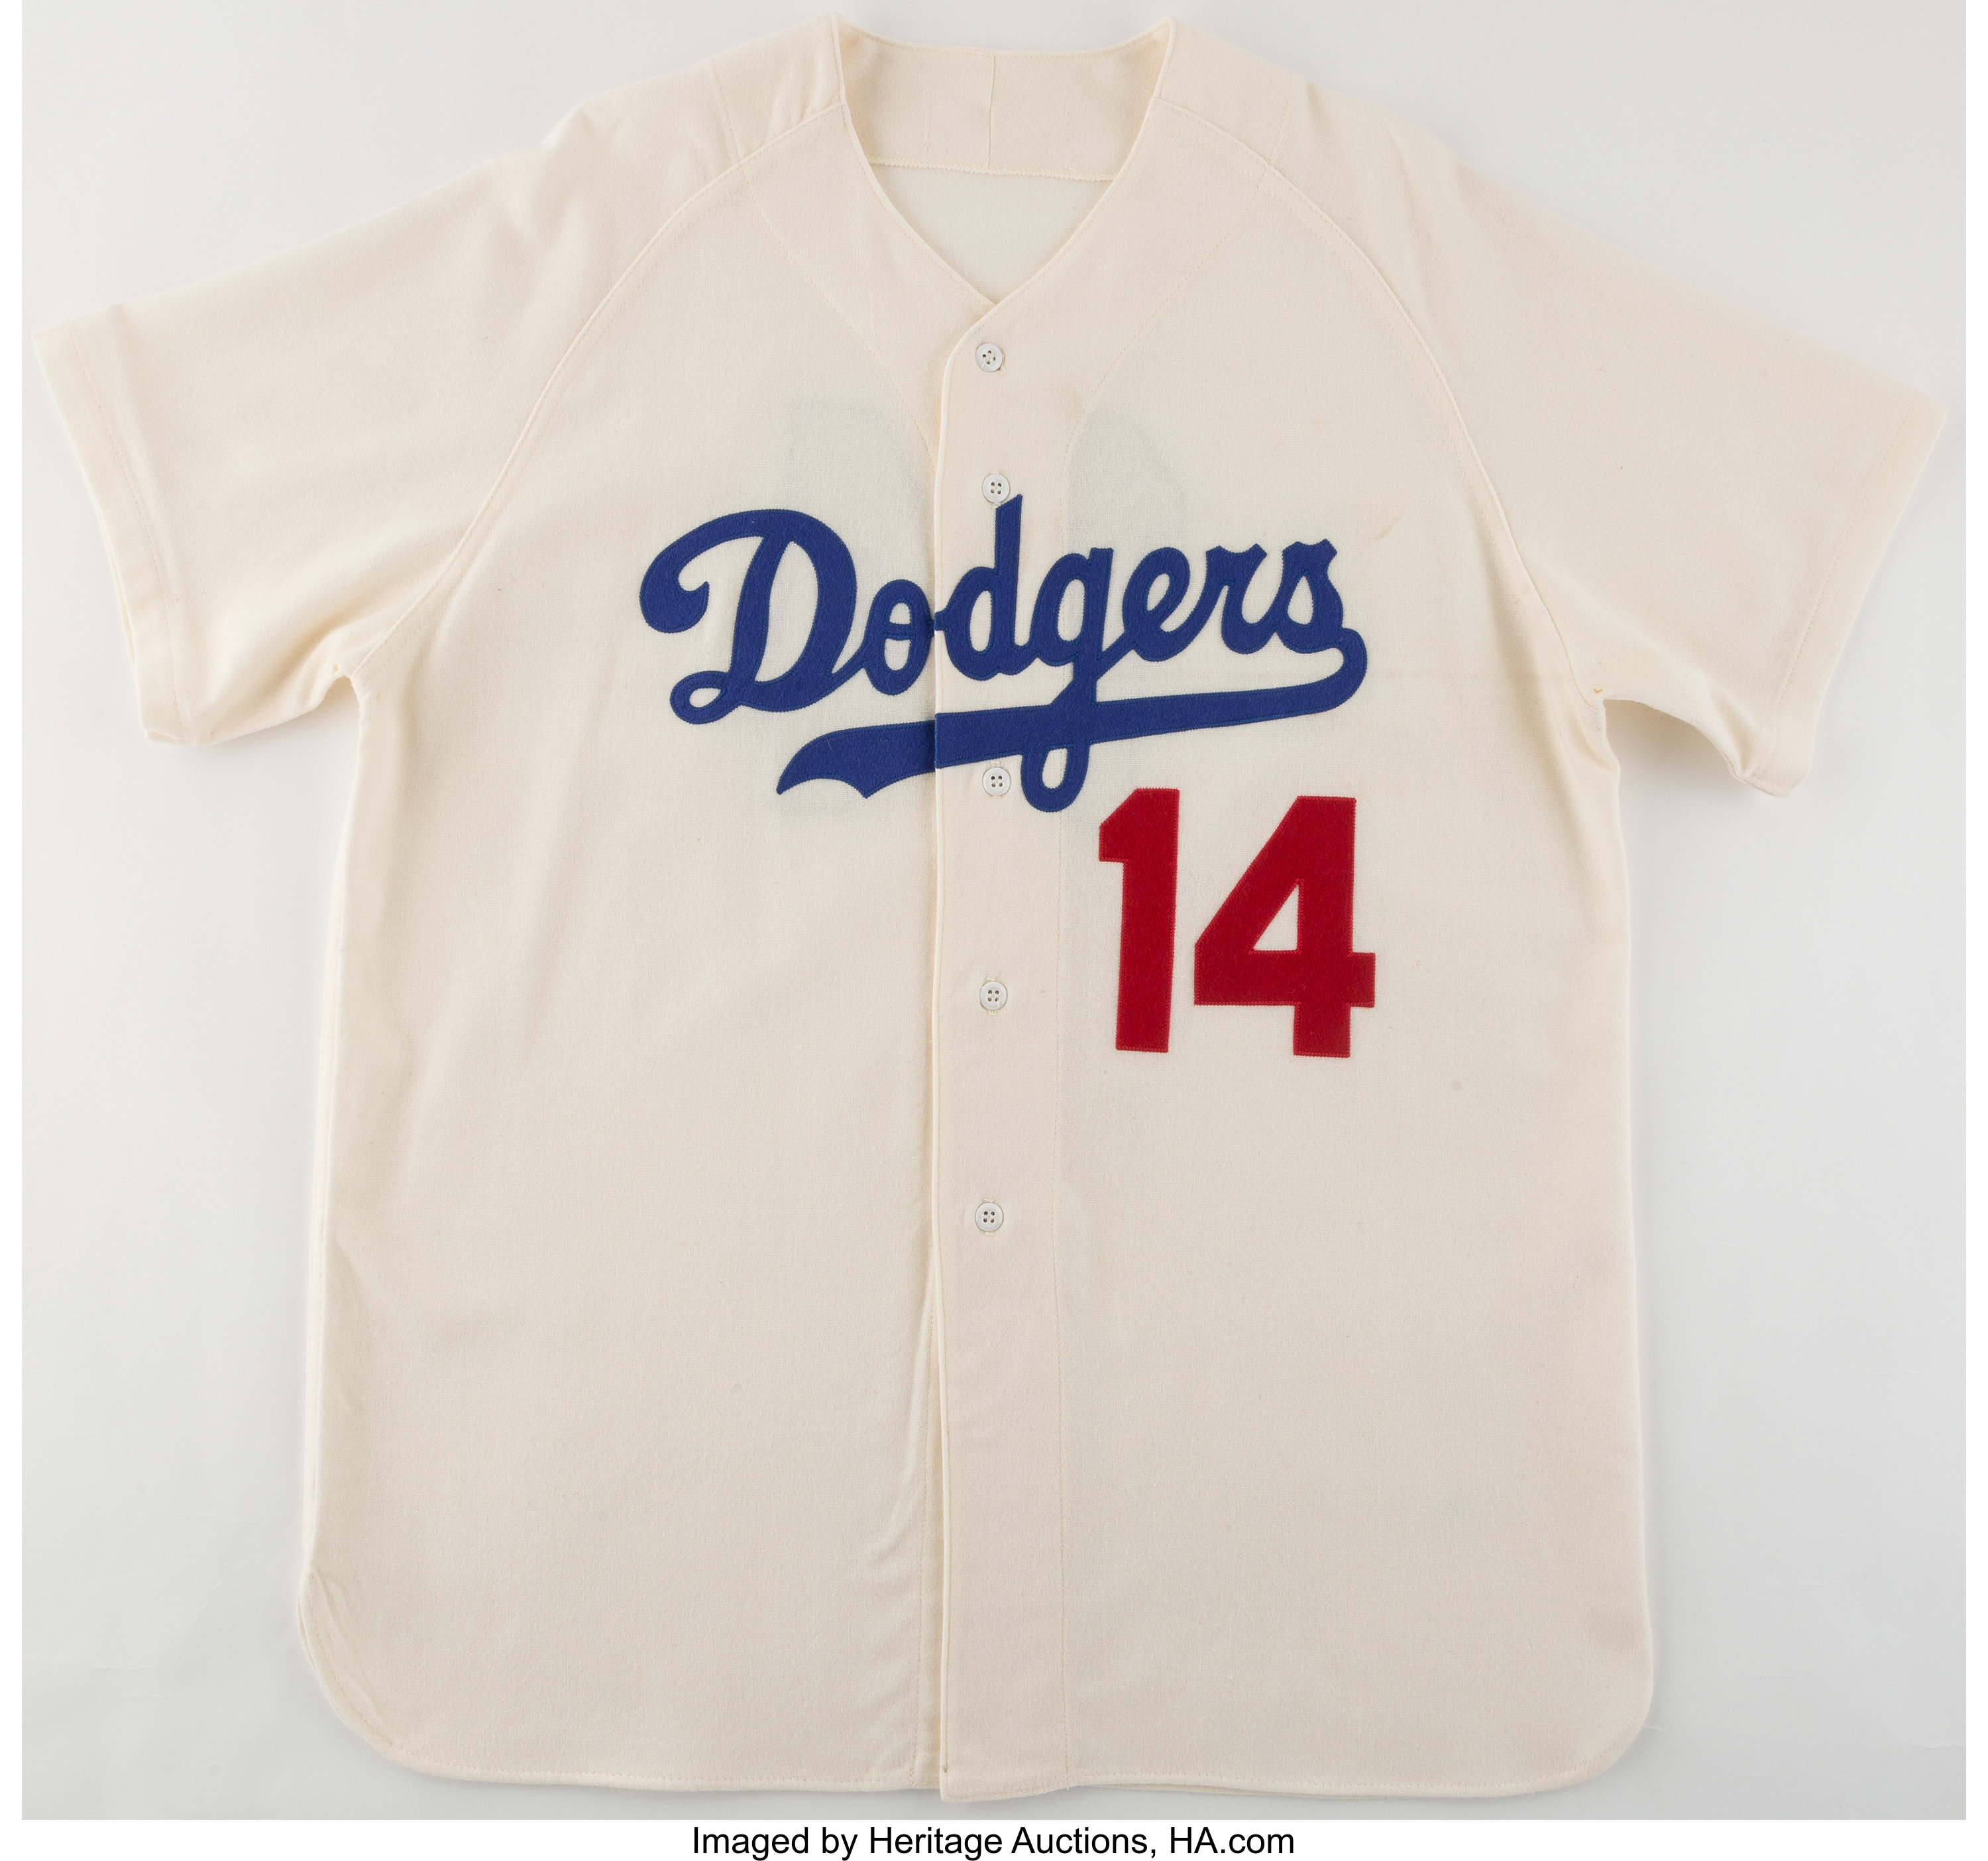 Brooklyn Dodgers Flannel Jersey. Baseball Collectibles Uniforms